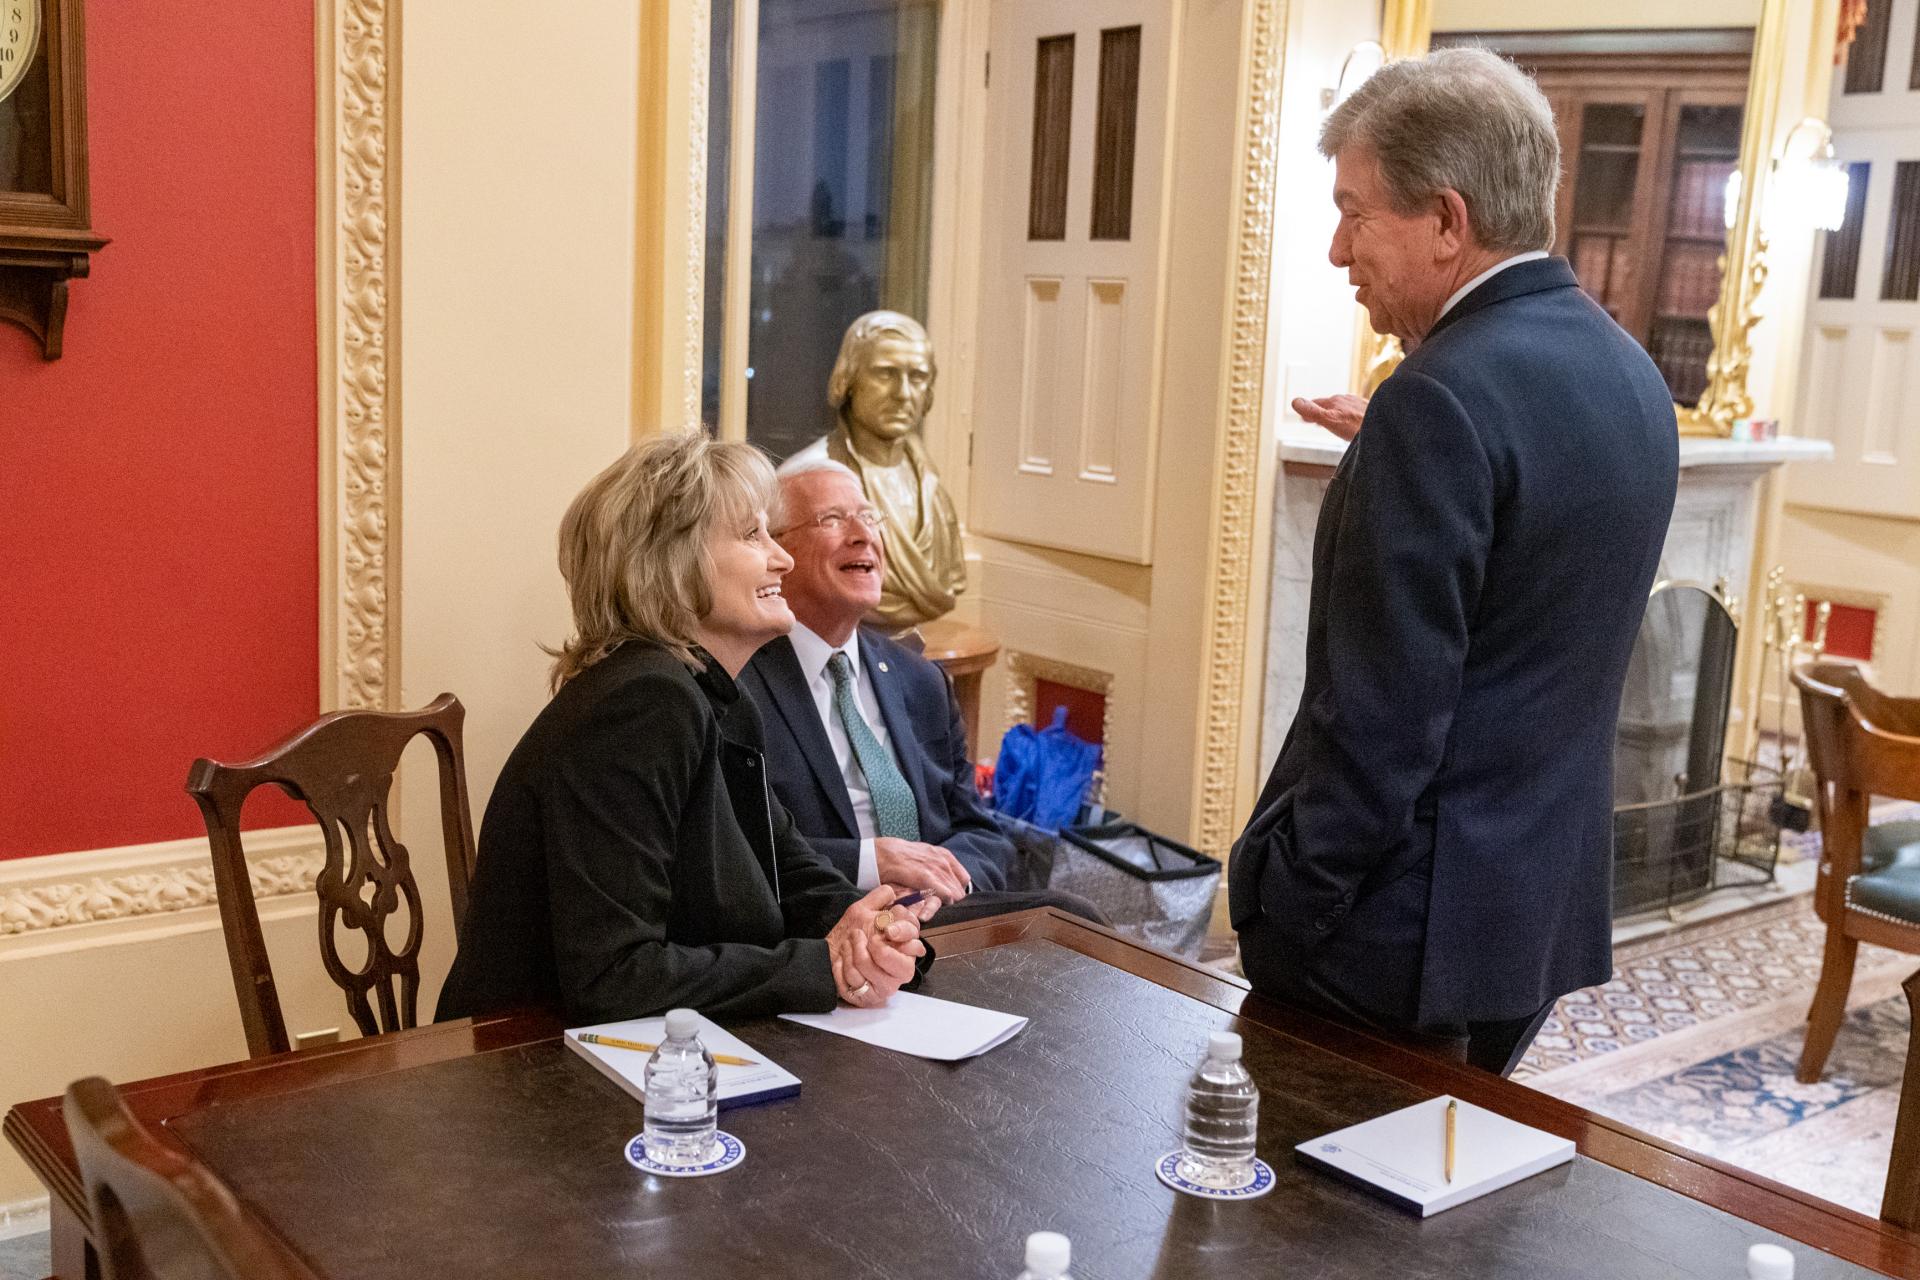 Senator Hyde-Smith and Senator Wicker visit with Senator Roy Blunt (R-Mo.) during a year-end Senate session at the Capitol. (Dec. 16, 2019)